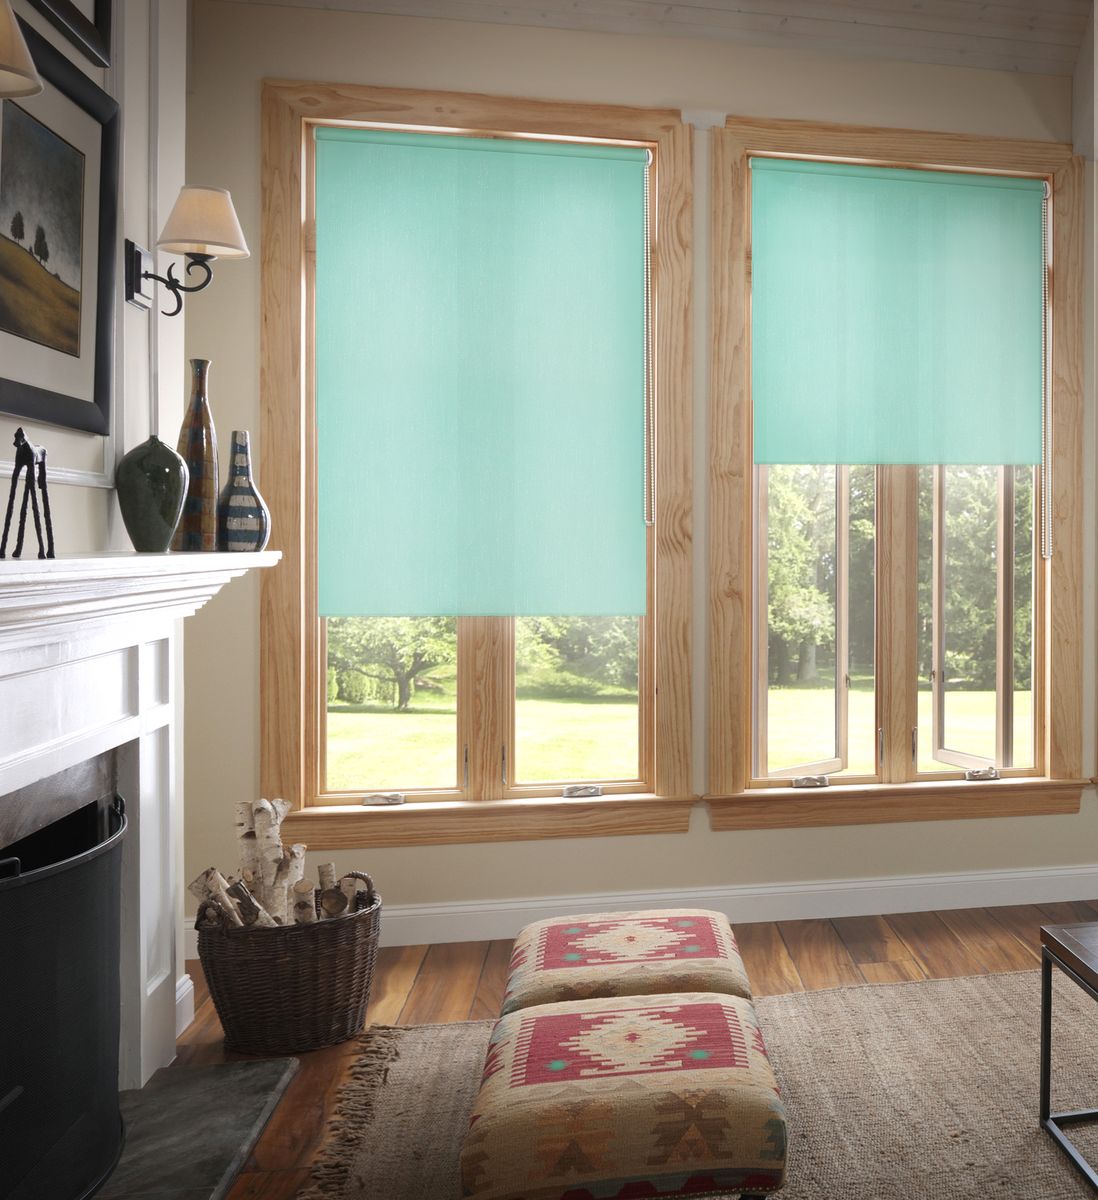 Azure accent roller blinds for wooden windows of casual living room with large mantelshelf fireplace